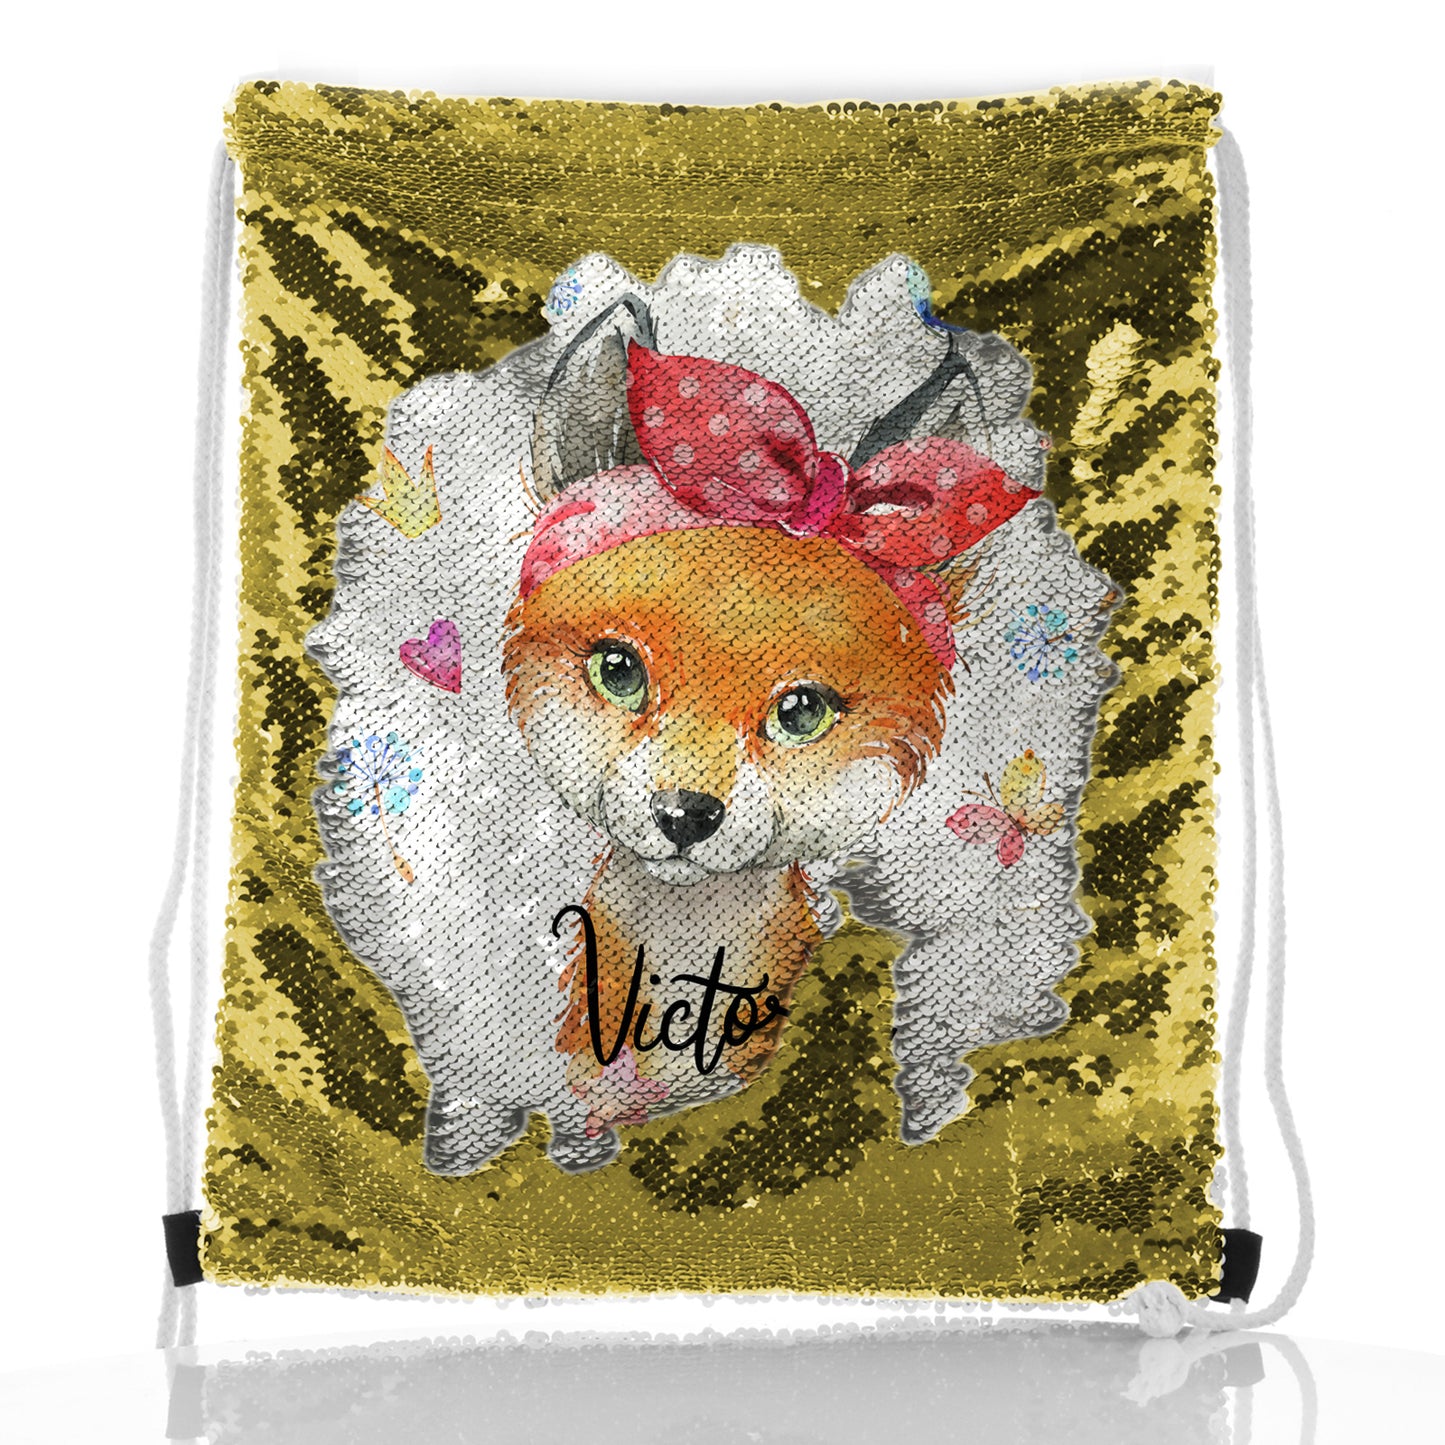 Personalised Sequin Drawstring Backpack with Red Fox with Hearts Dandelion Butterflies and Cute Text